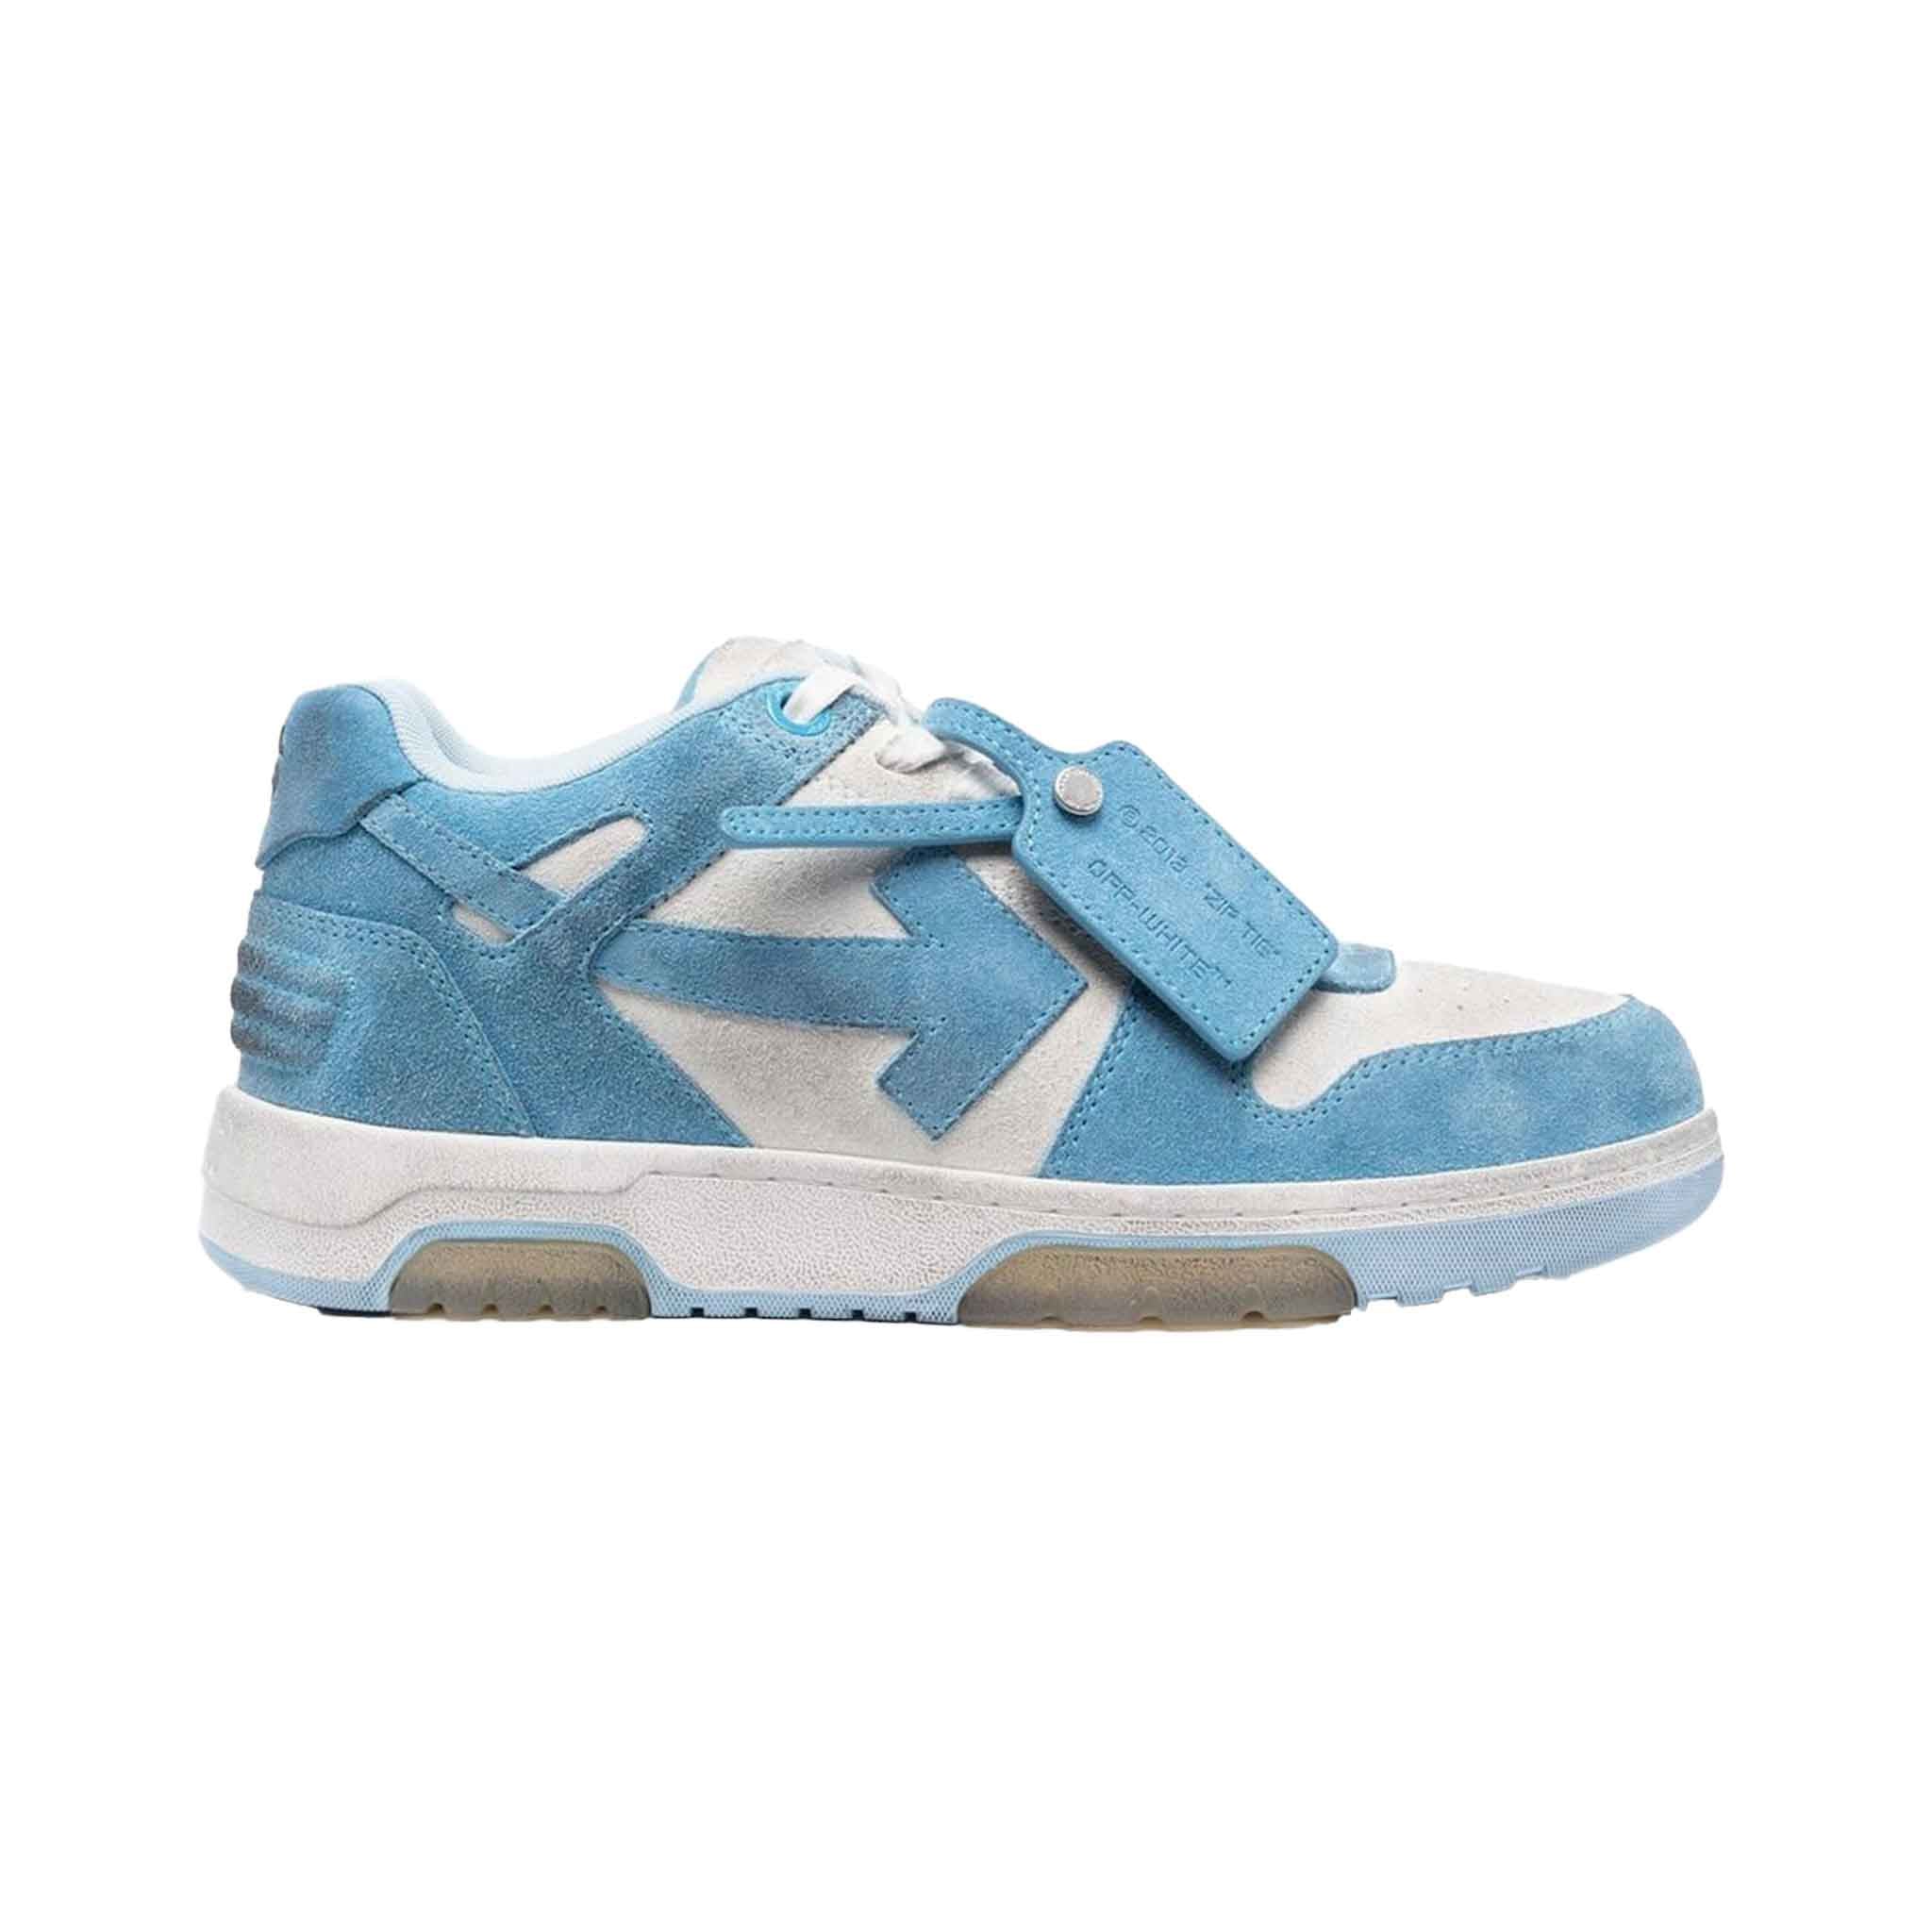 OFF-WHITE Out Of Office Vintage Suede Sneaker in White/ Light Blue